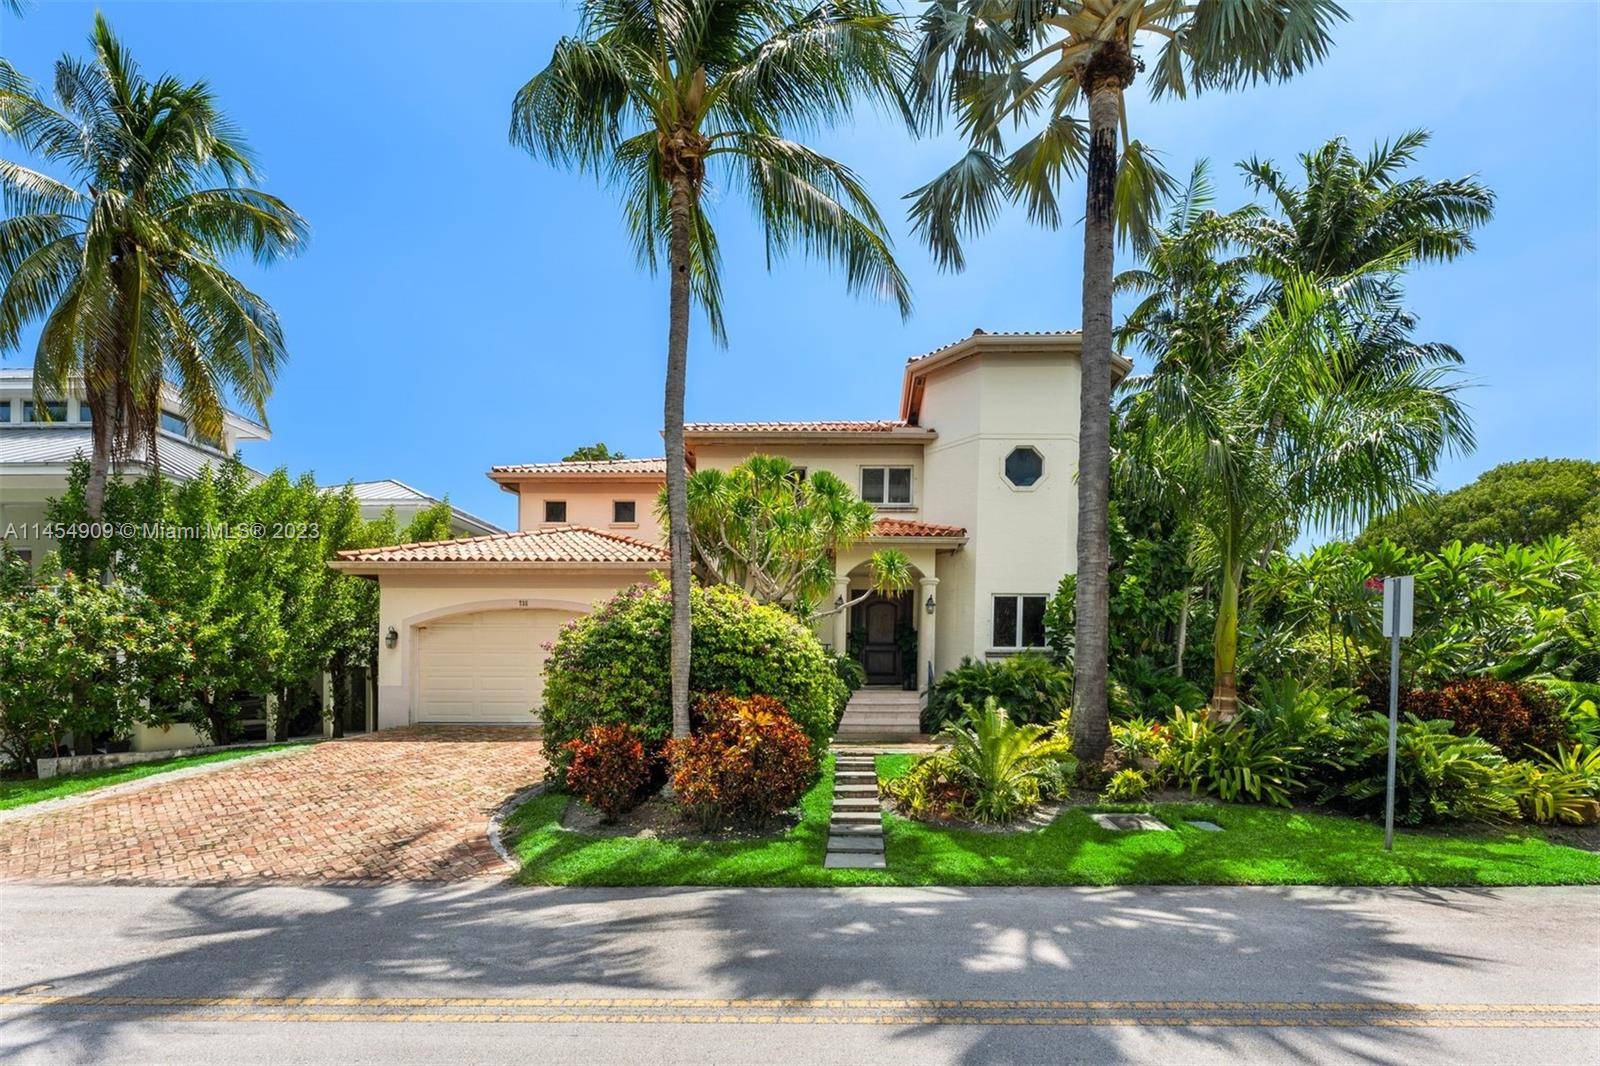 This elegant home is located on prestigious Harbor Drive in a corner lot surrounded by lush landscaping creating a serene private oasis.